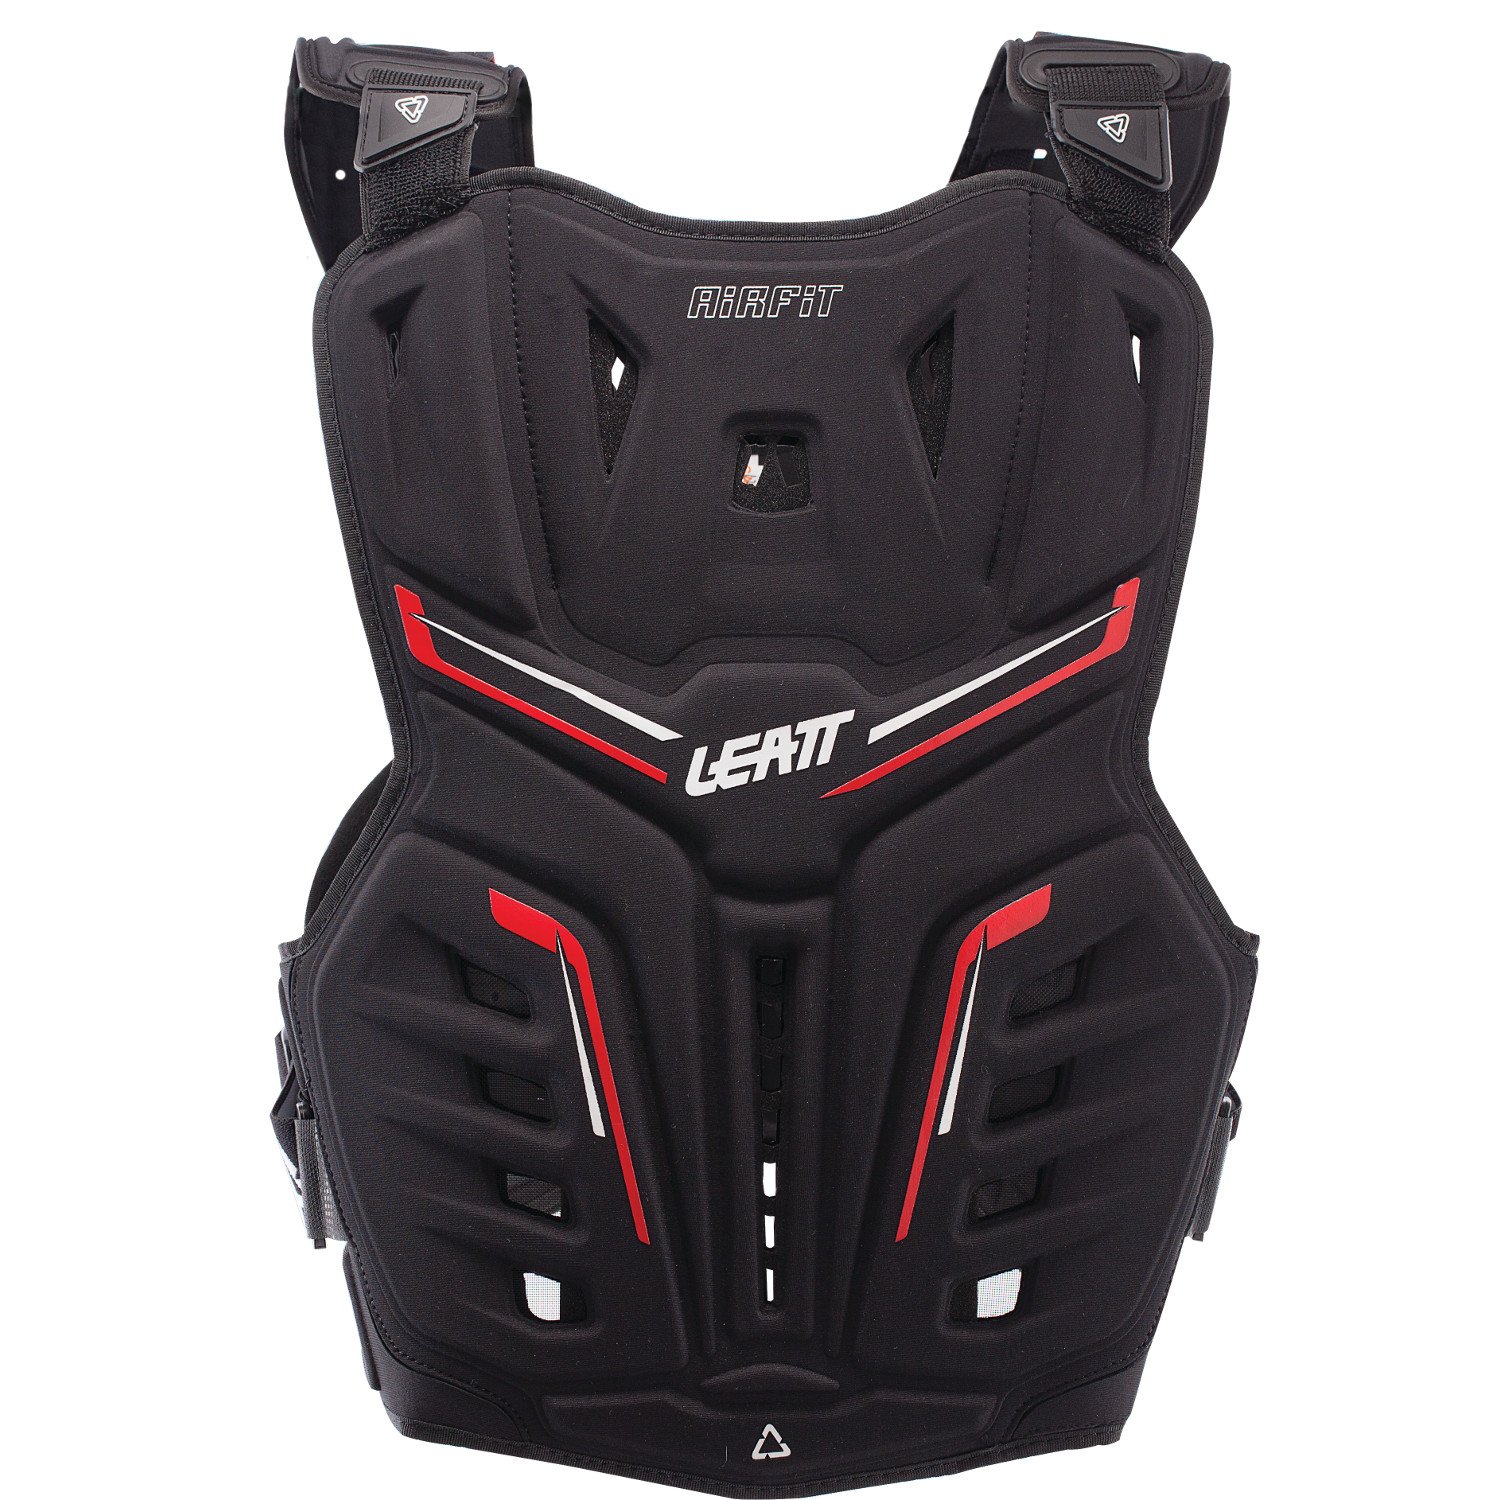 Leatt Chest Protector Chest Protector 3DF AirFit Black/Red 2019 ...